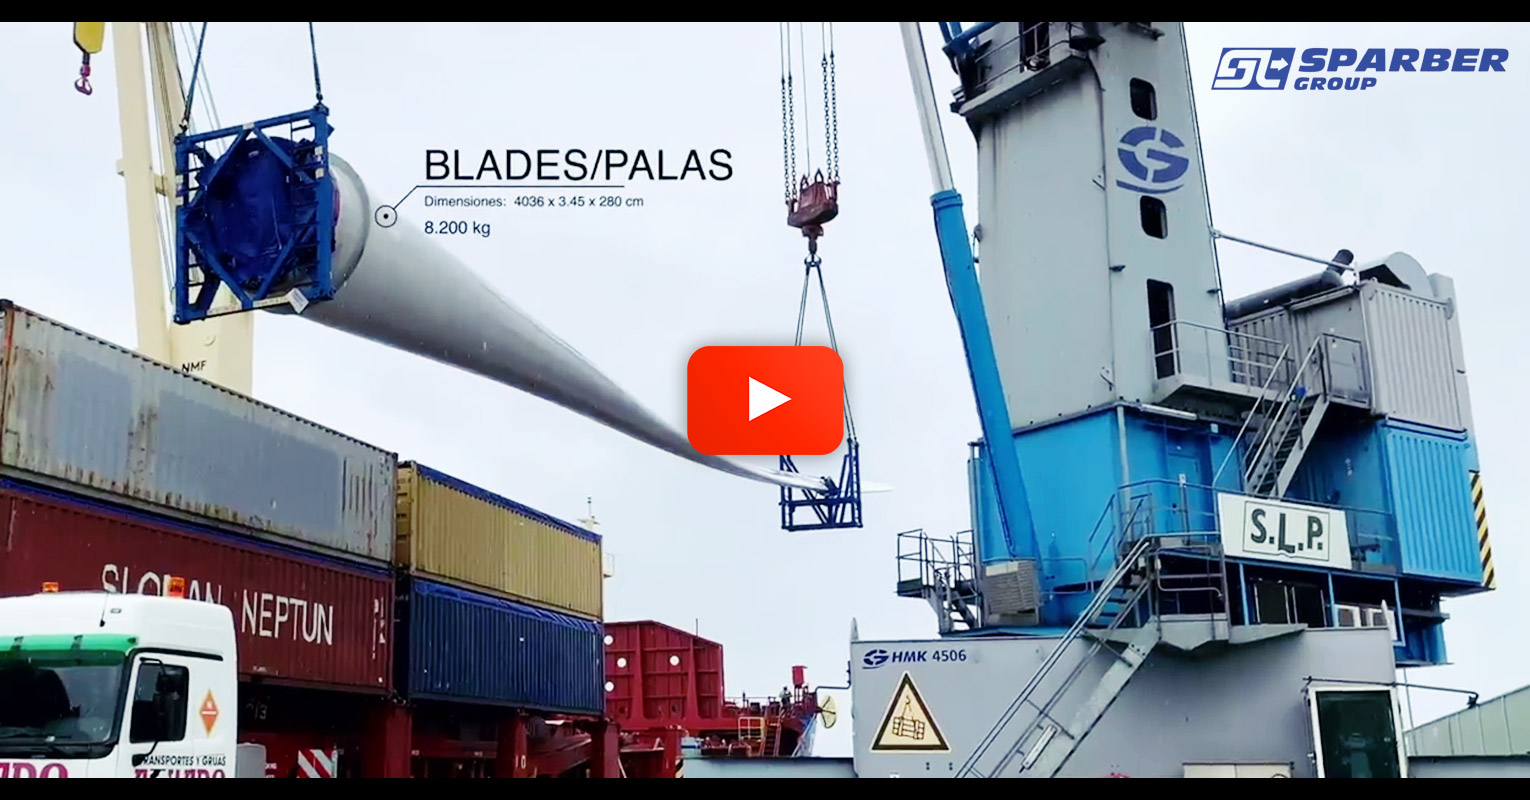 Vido - Sparber Group Shipped Wind Turbine Cargo from Bremen to Bilbao